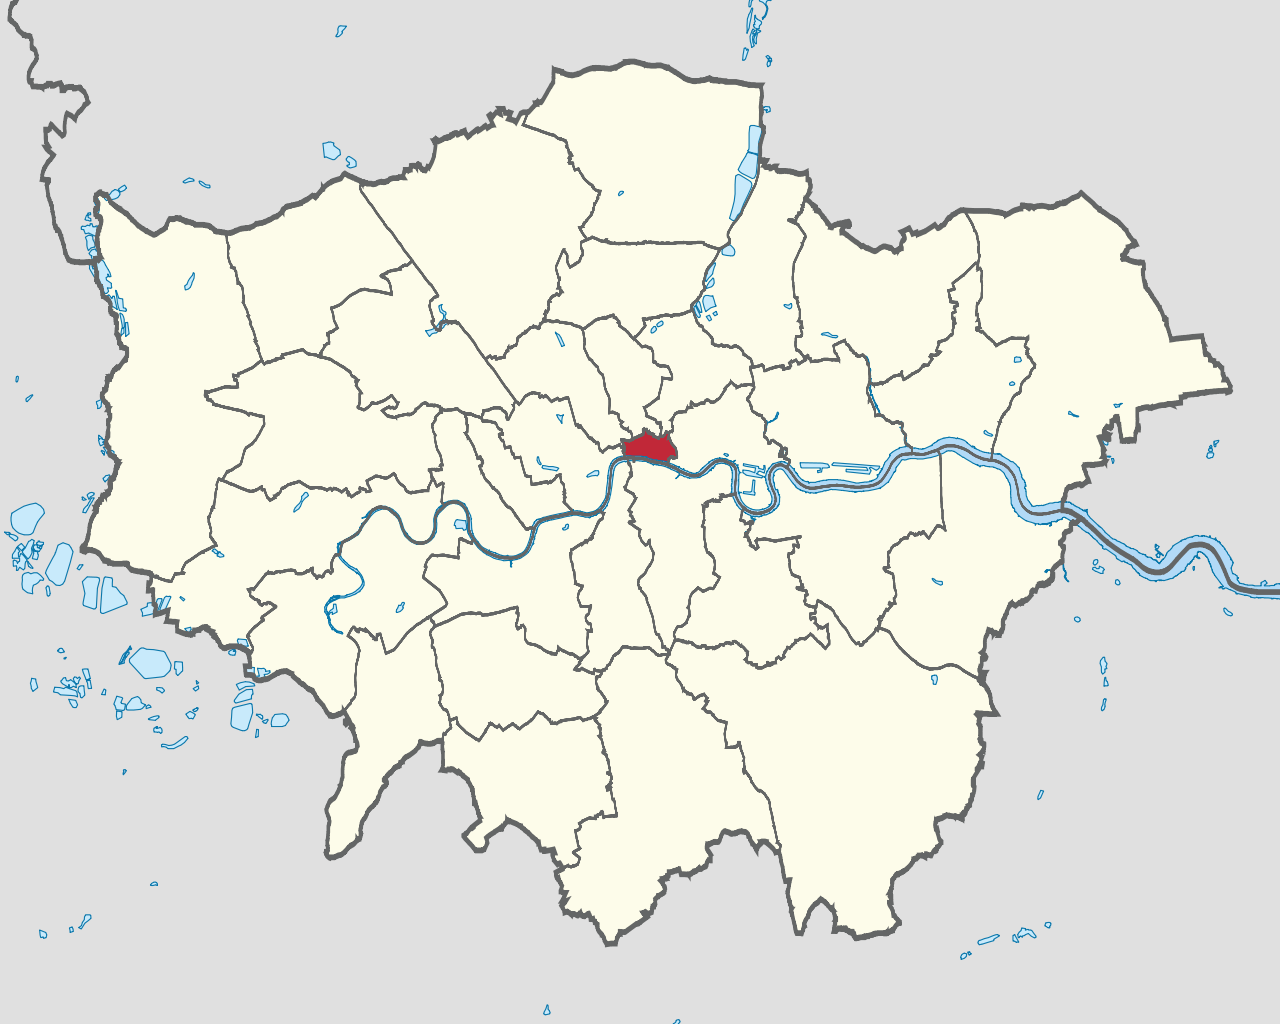 File:City of London in Greater London.svg - Wikimedia Commons